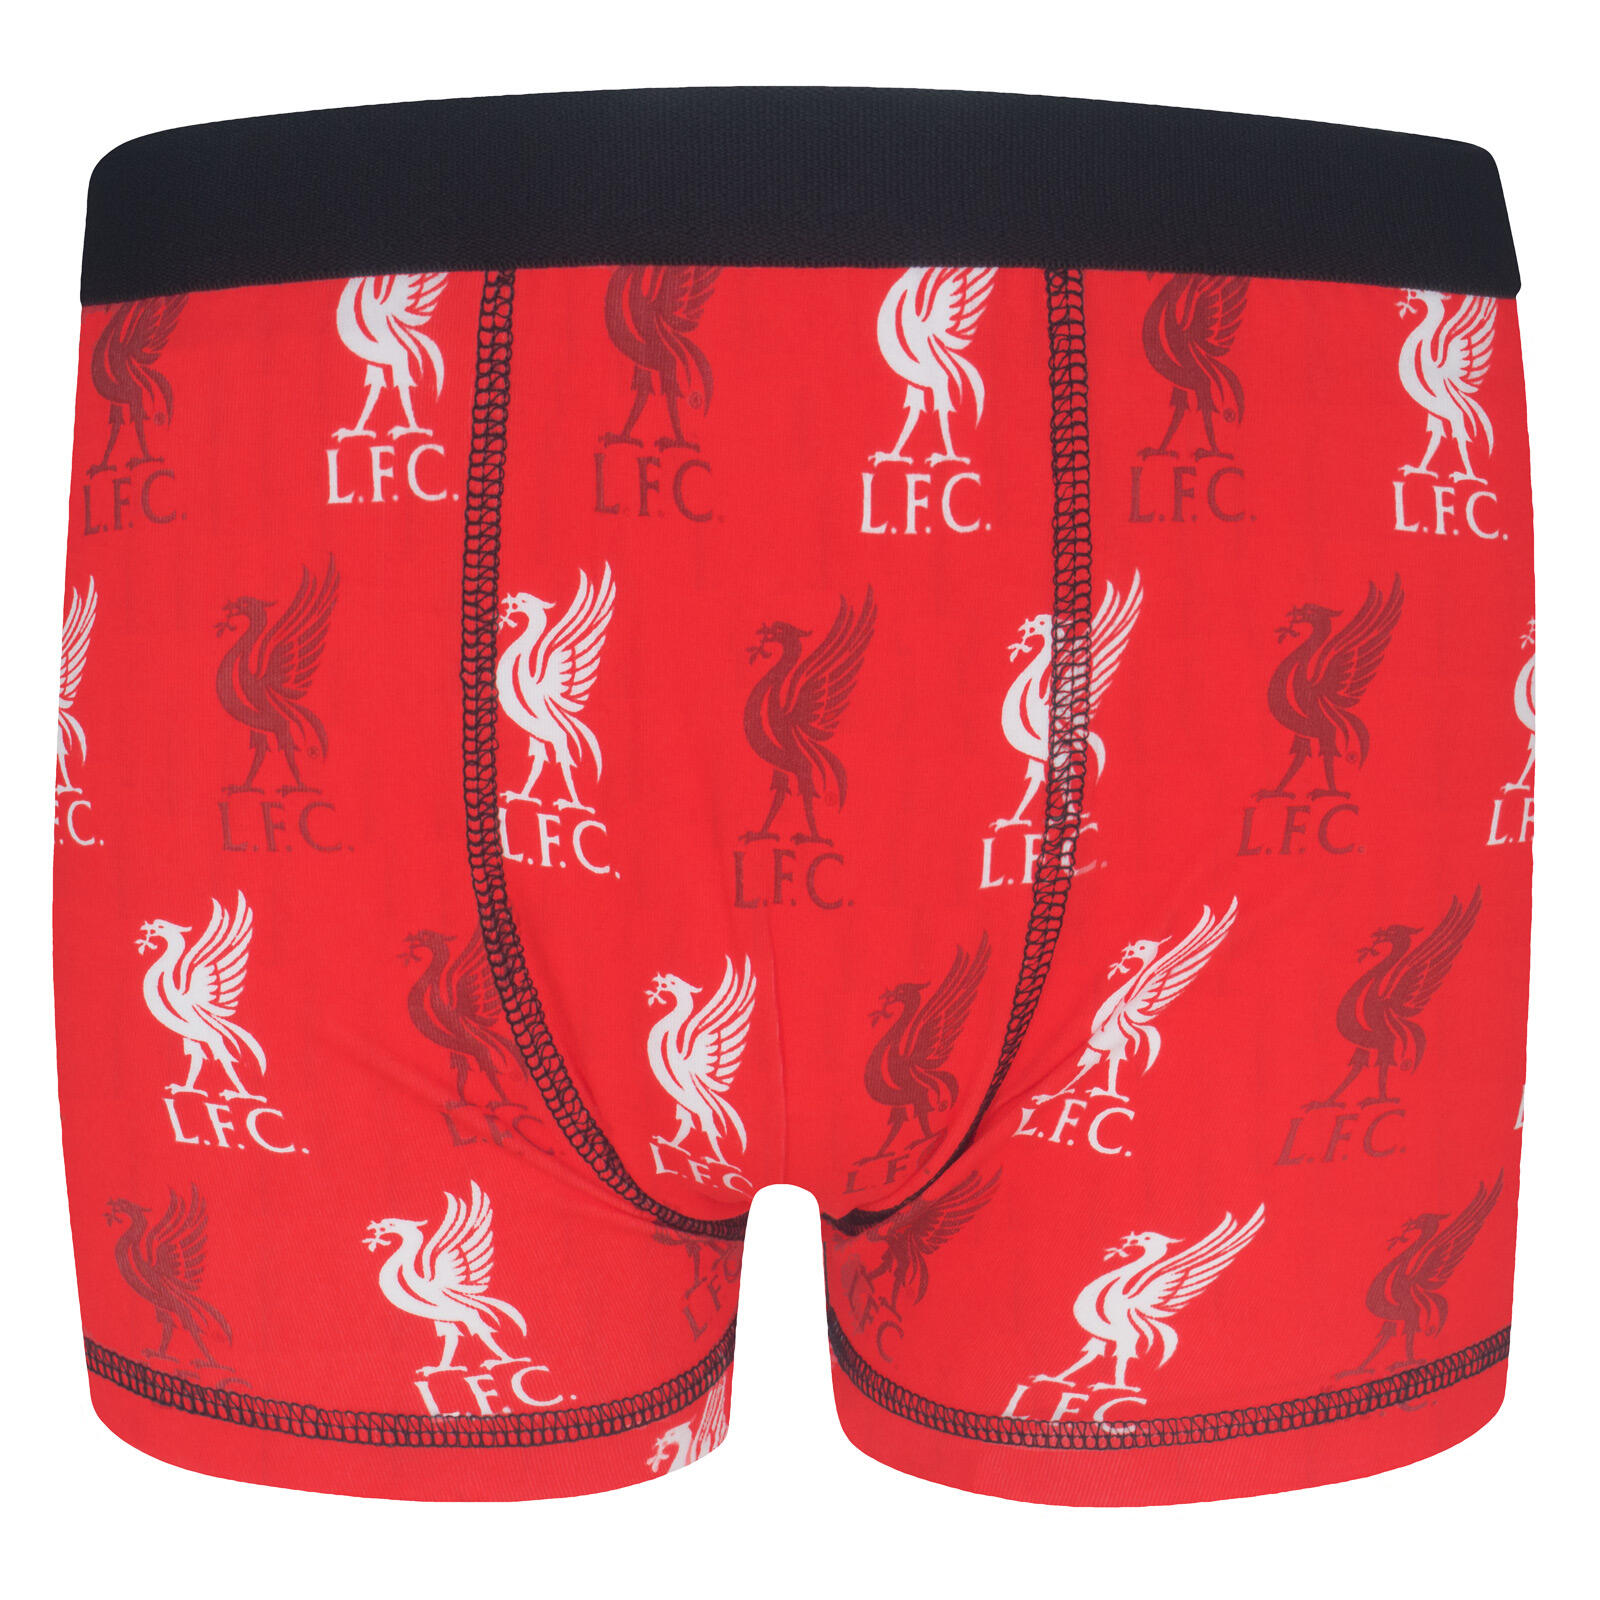 LIVERPOOL FC Liverpool FC Boys Boxer Shorts 1 Pack OFFICIAL Football Gift